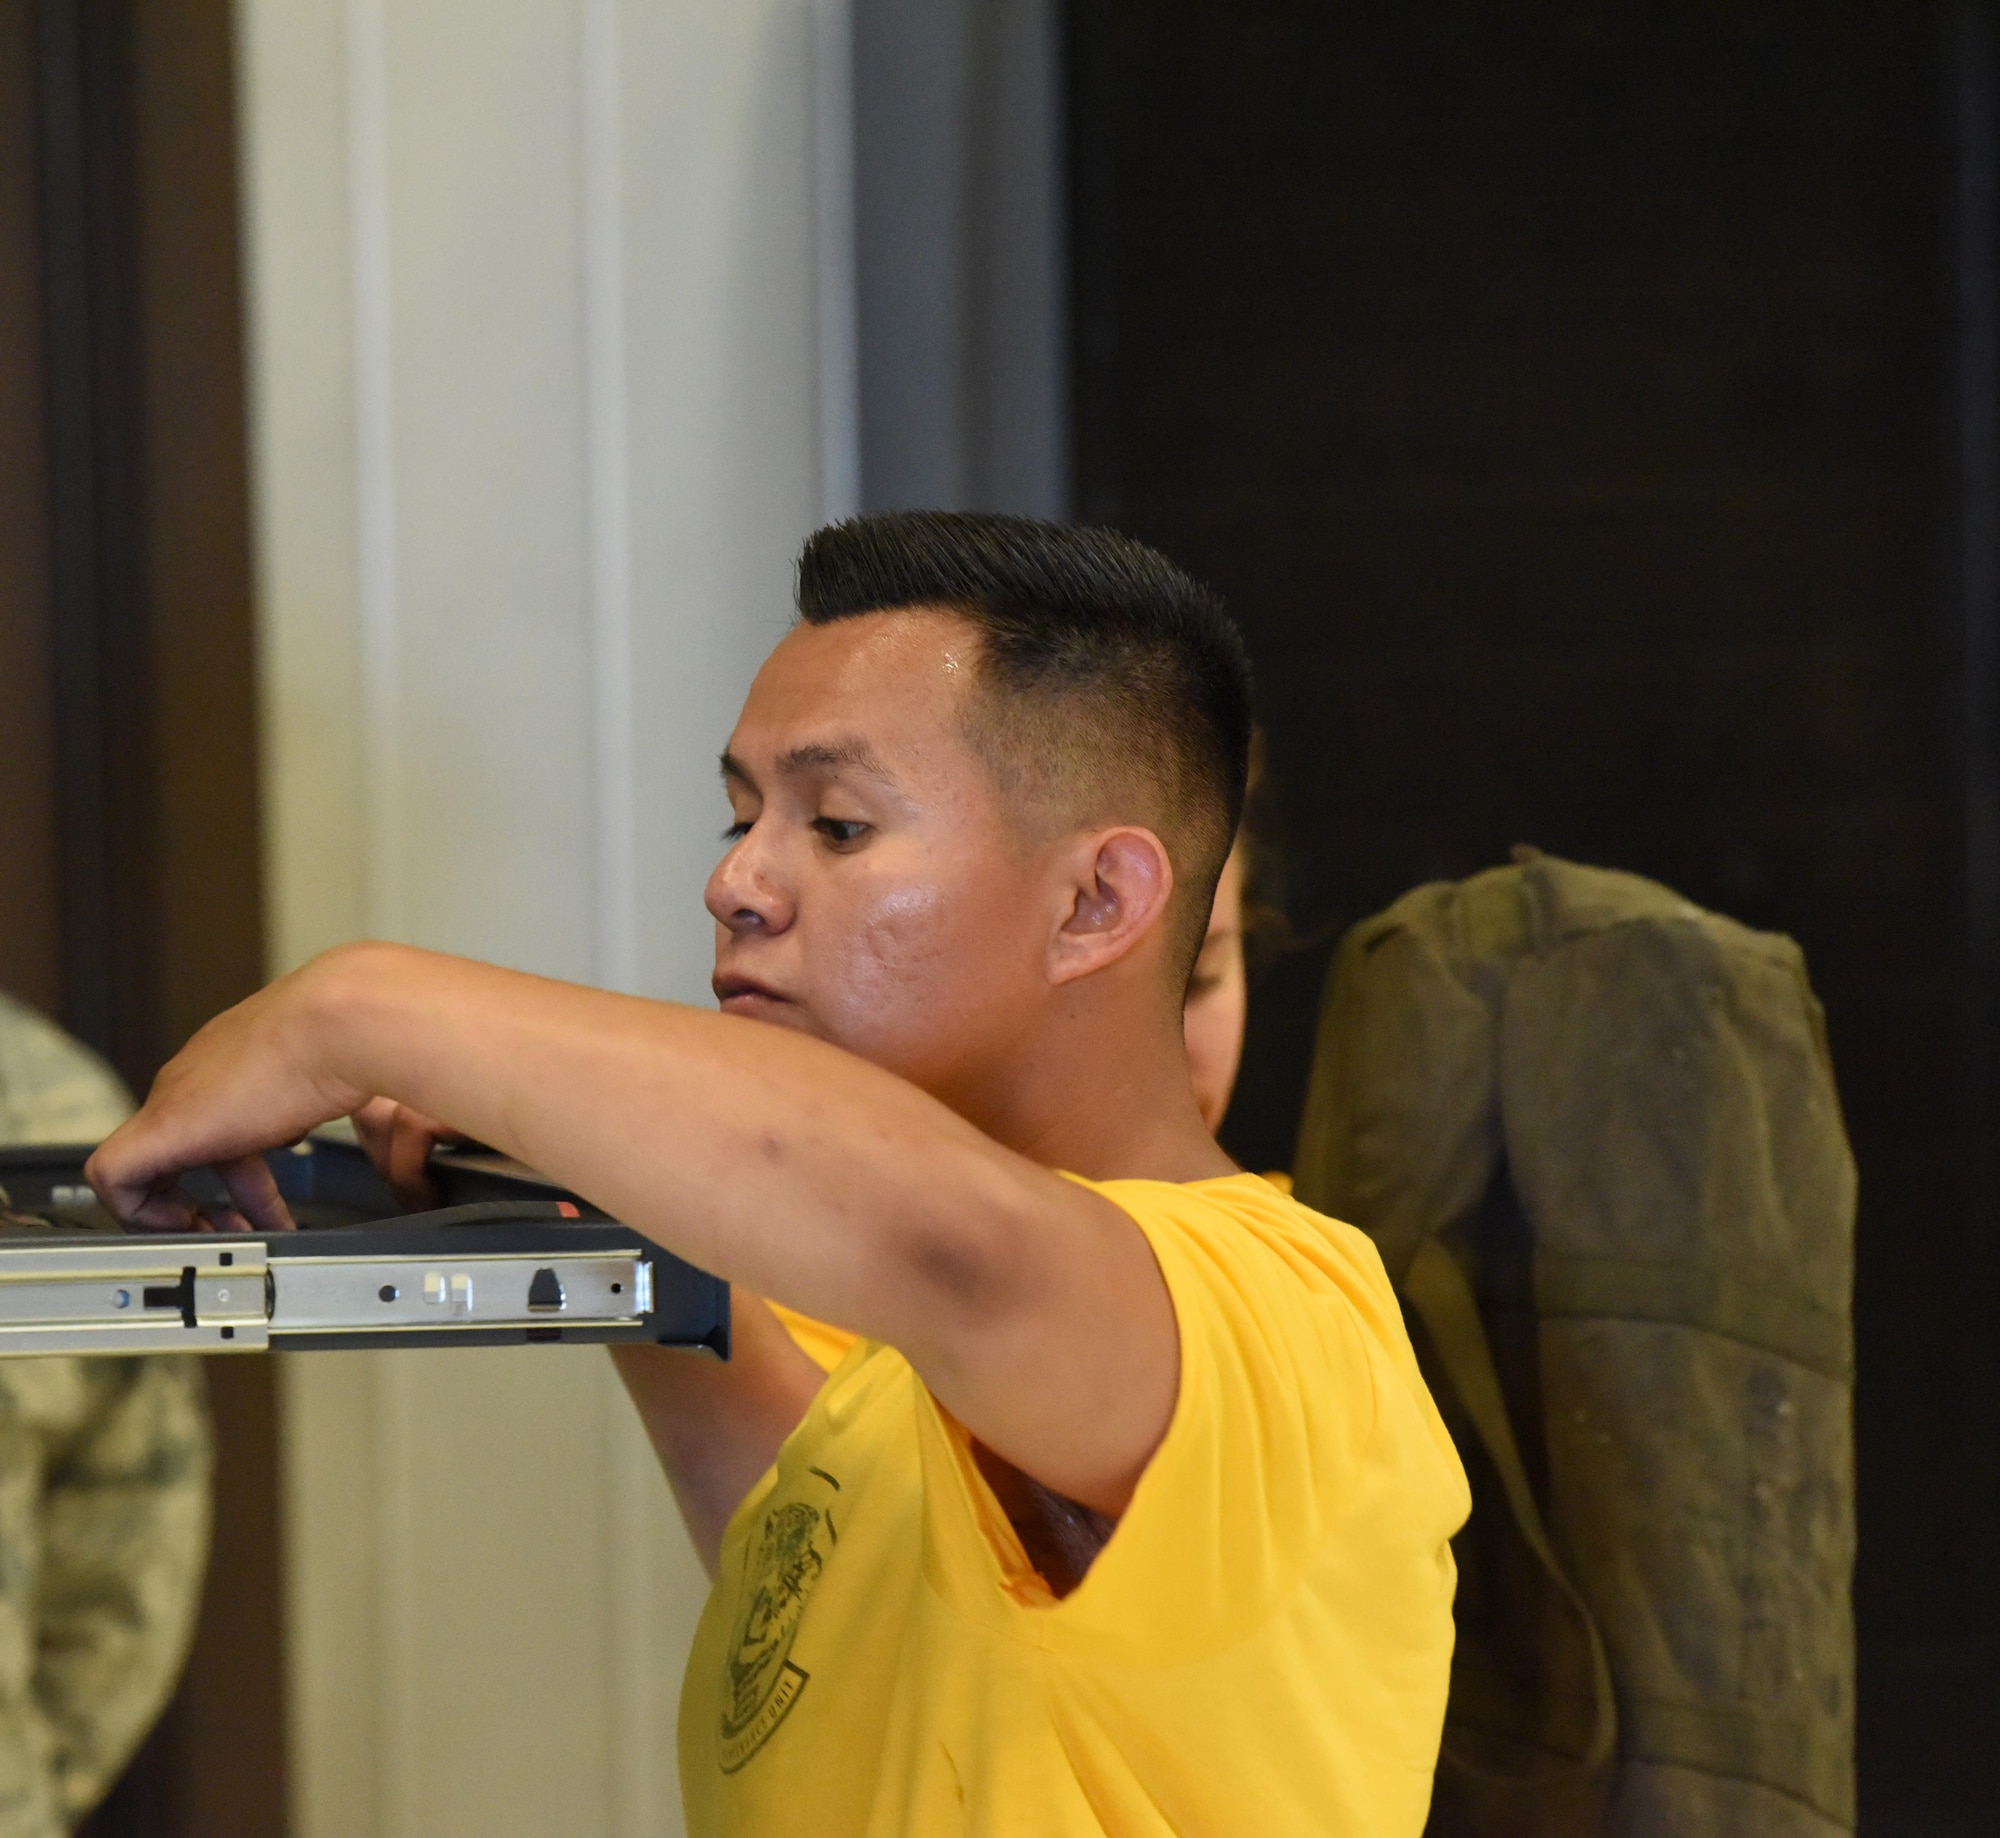 Airman 1st Class Christian Garcia, a 37th Aircraft Maintenance Unit weapons loader, looks for a wrench in a toolbox during a load competition at Ellsworth Air Force Base, S.D., July 13, 2018. Participants were judged on their uniforms, the condition of their tools, the time it took to load the bombs on the aircraft and how safely they performed their tasks. (U.S Air Force photo by Airman 1st Class Thomas Karol)